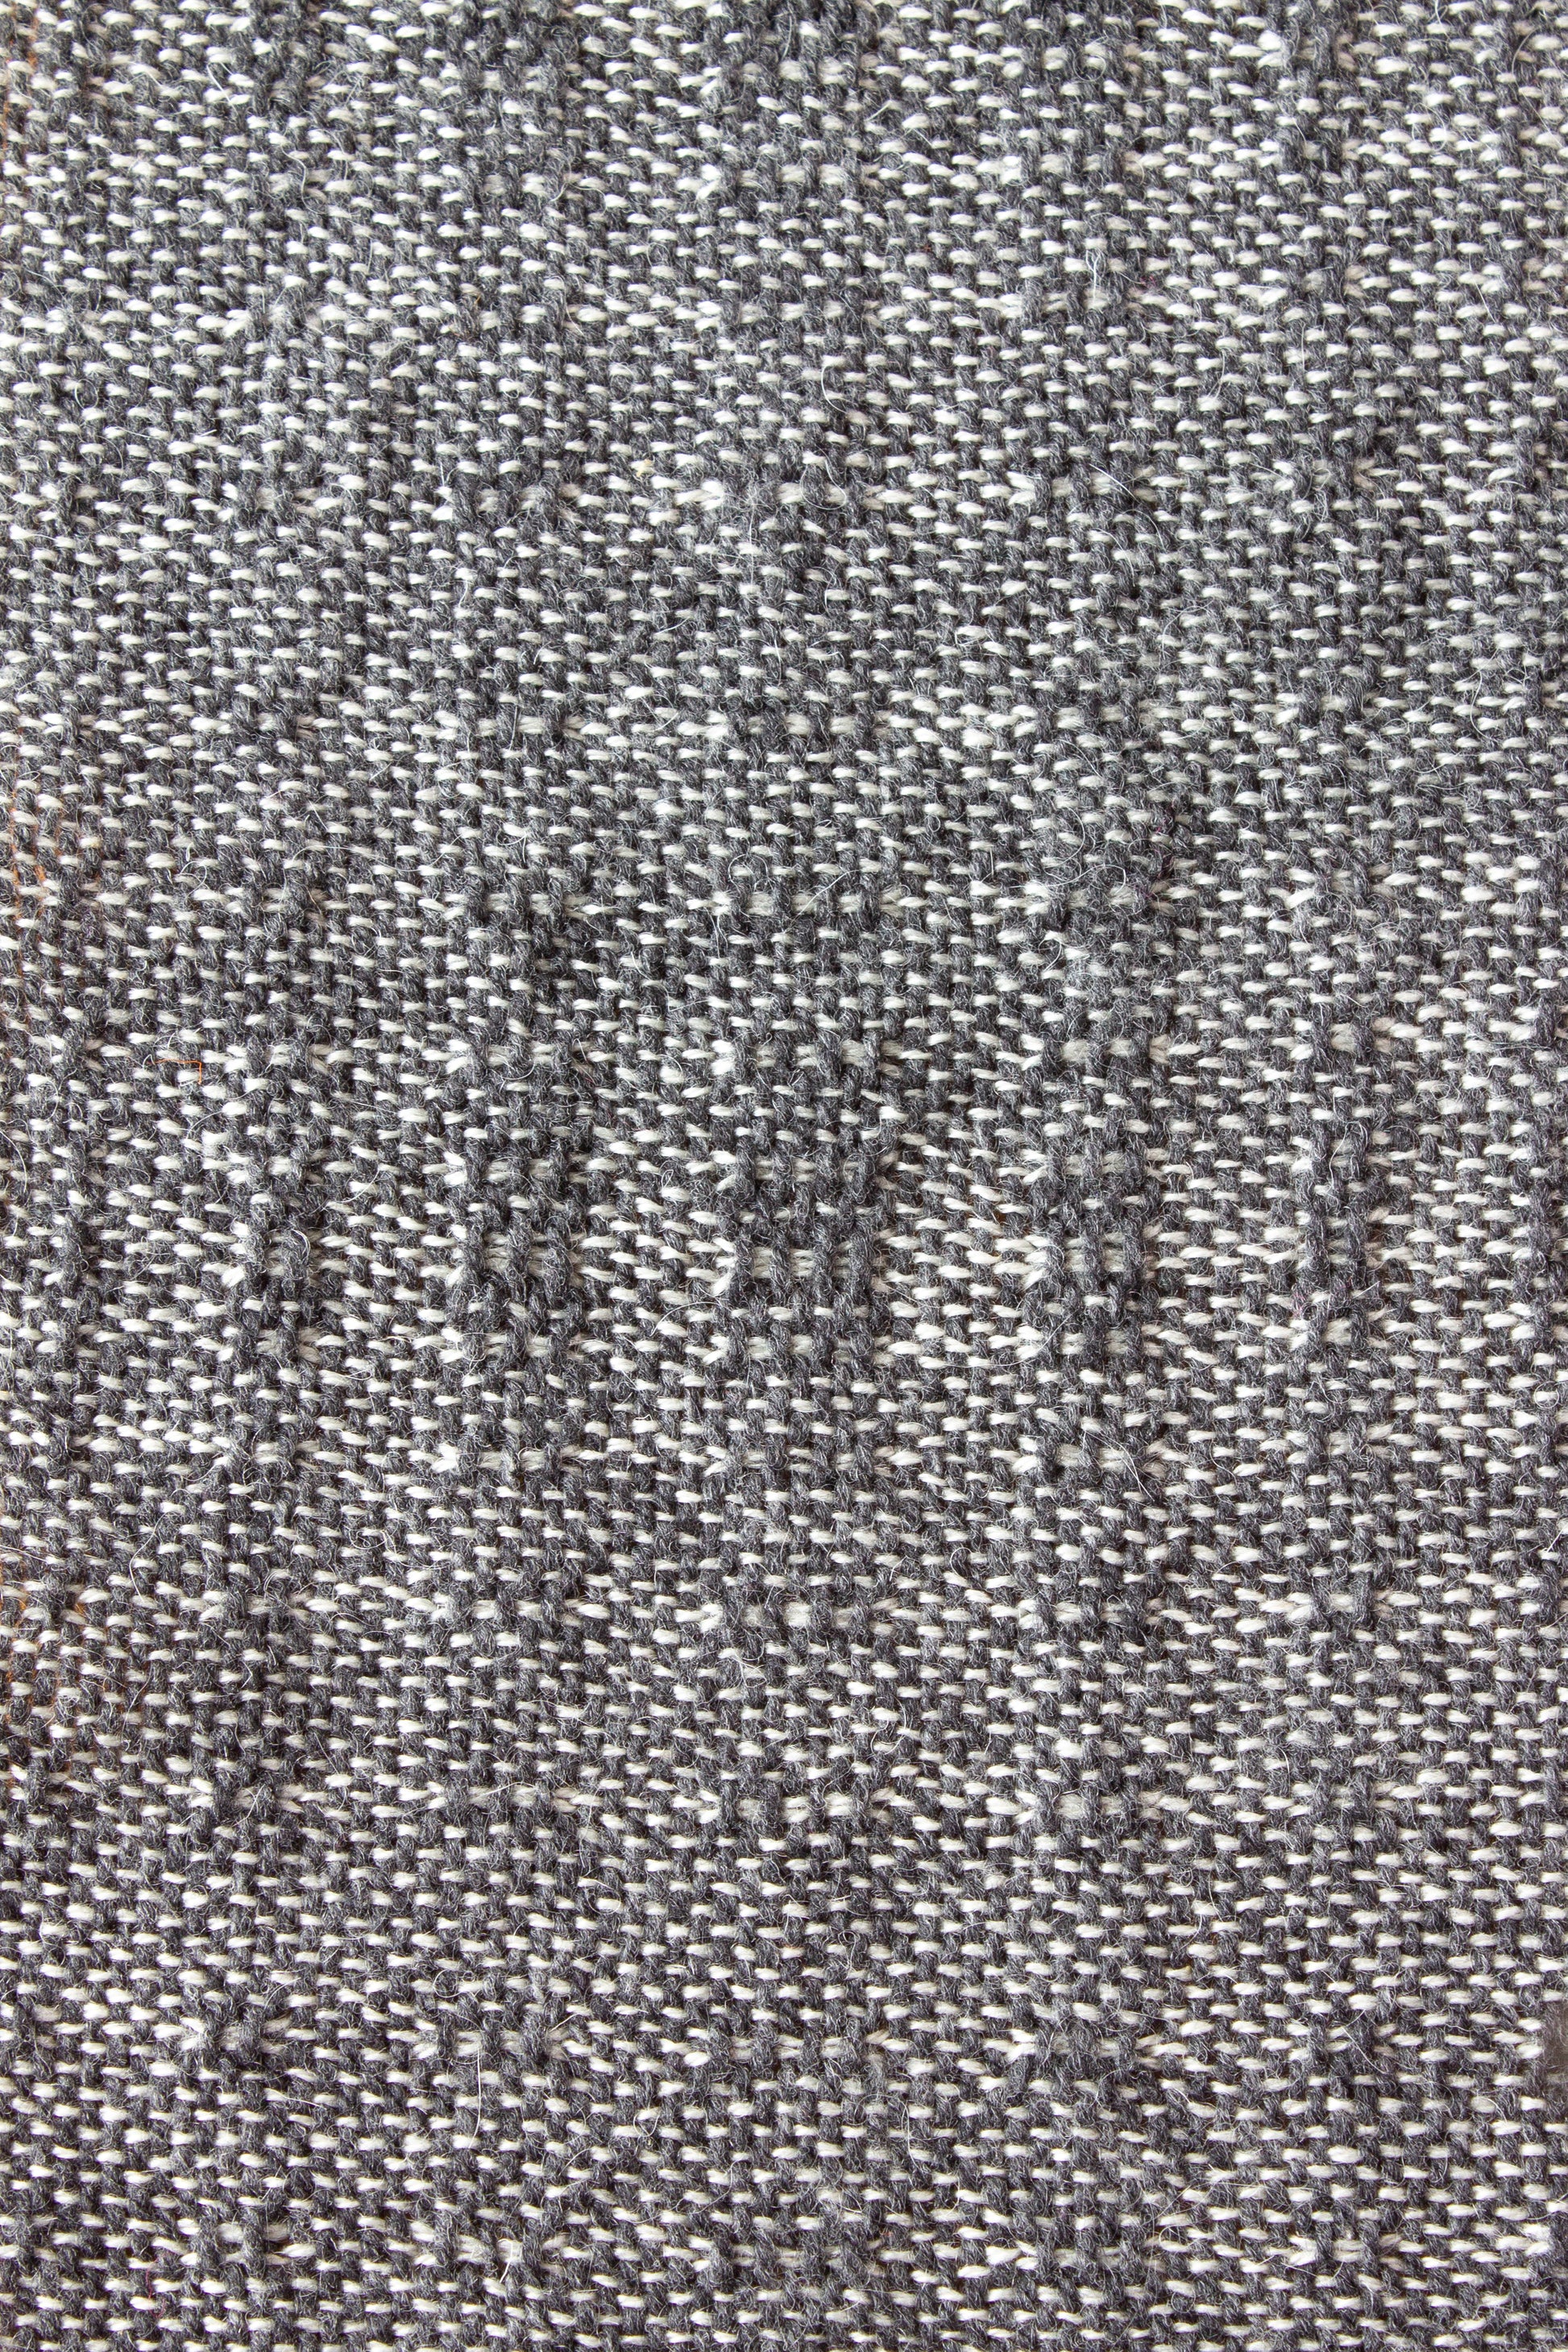 Wool scarf, grey weft float patterned, off-white, undyed, handmade, natural fibres, mohair, locally sourced, woven in Canada